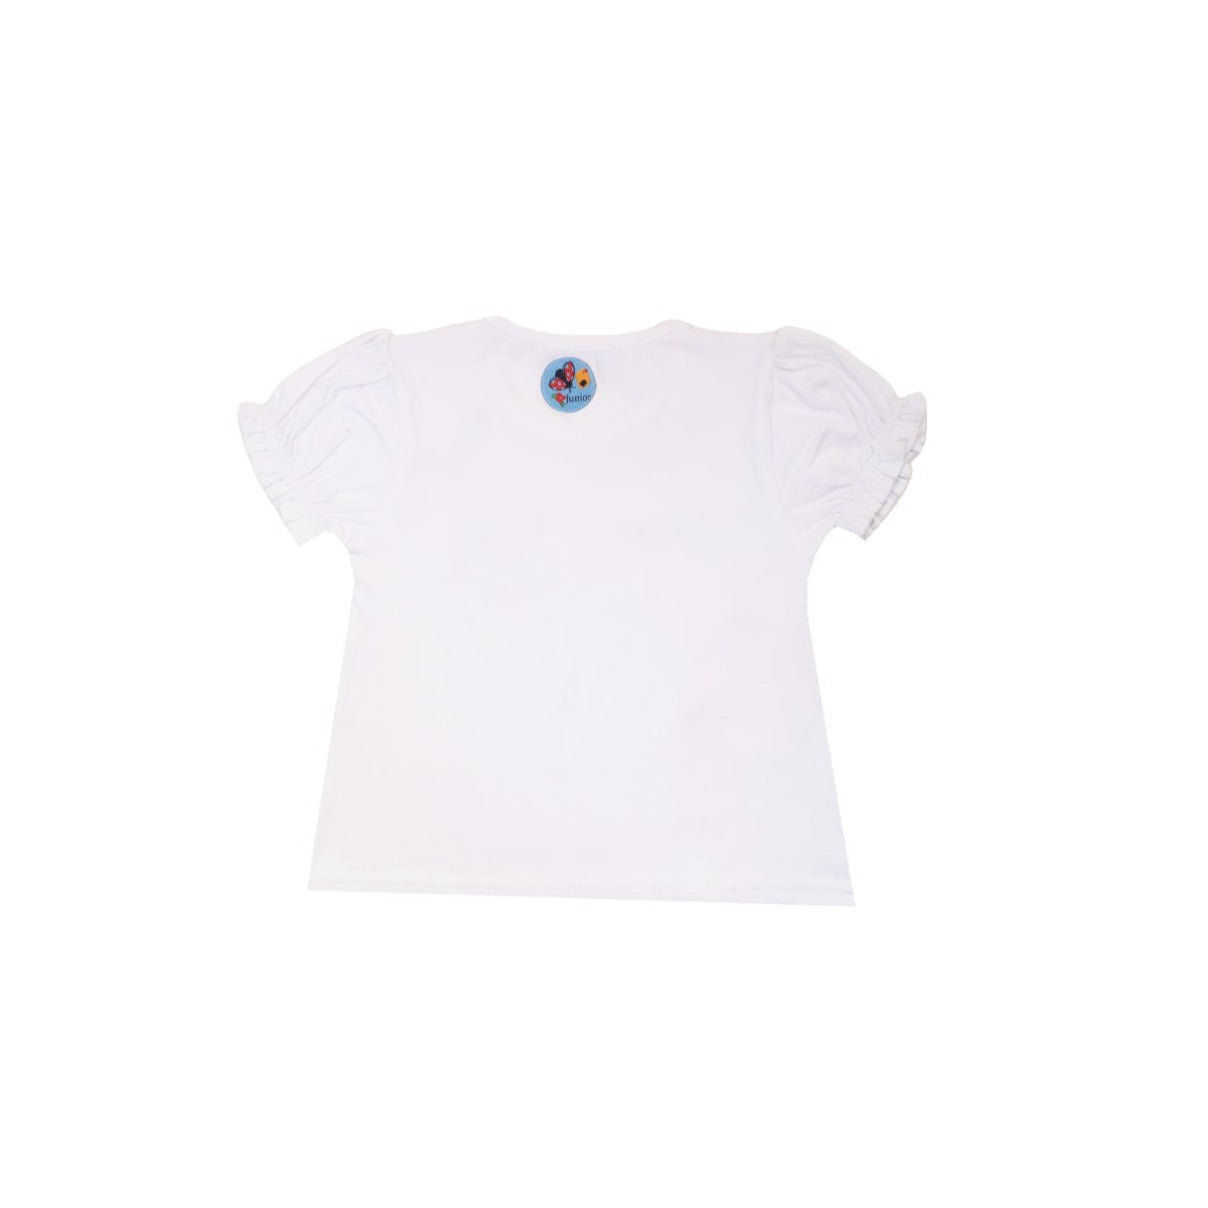 Embroidered Short Sleeve T-shirt